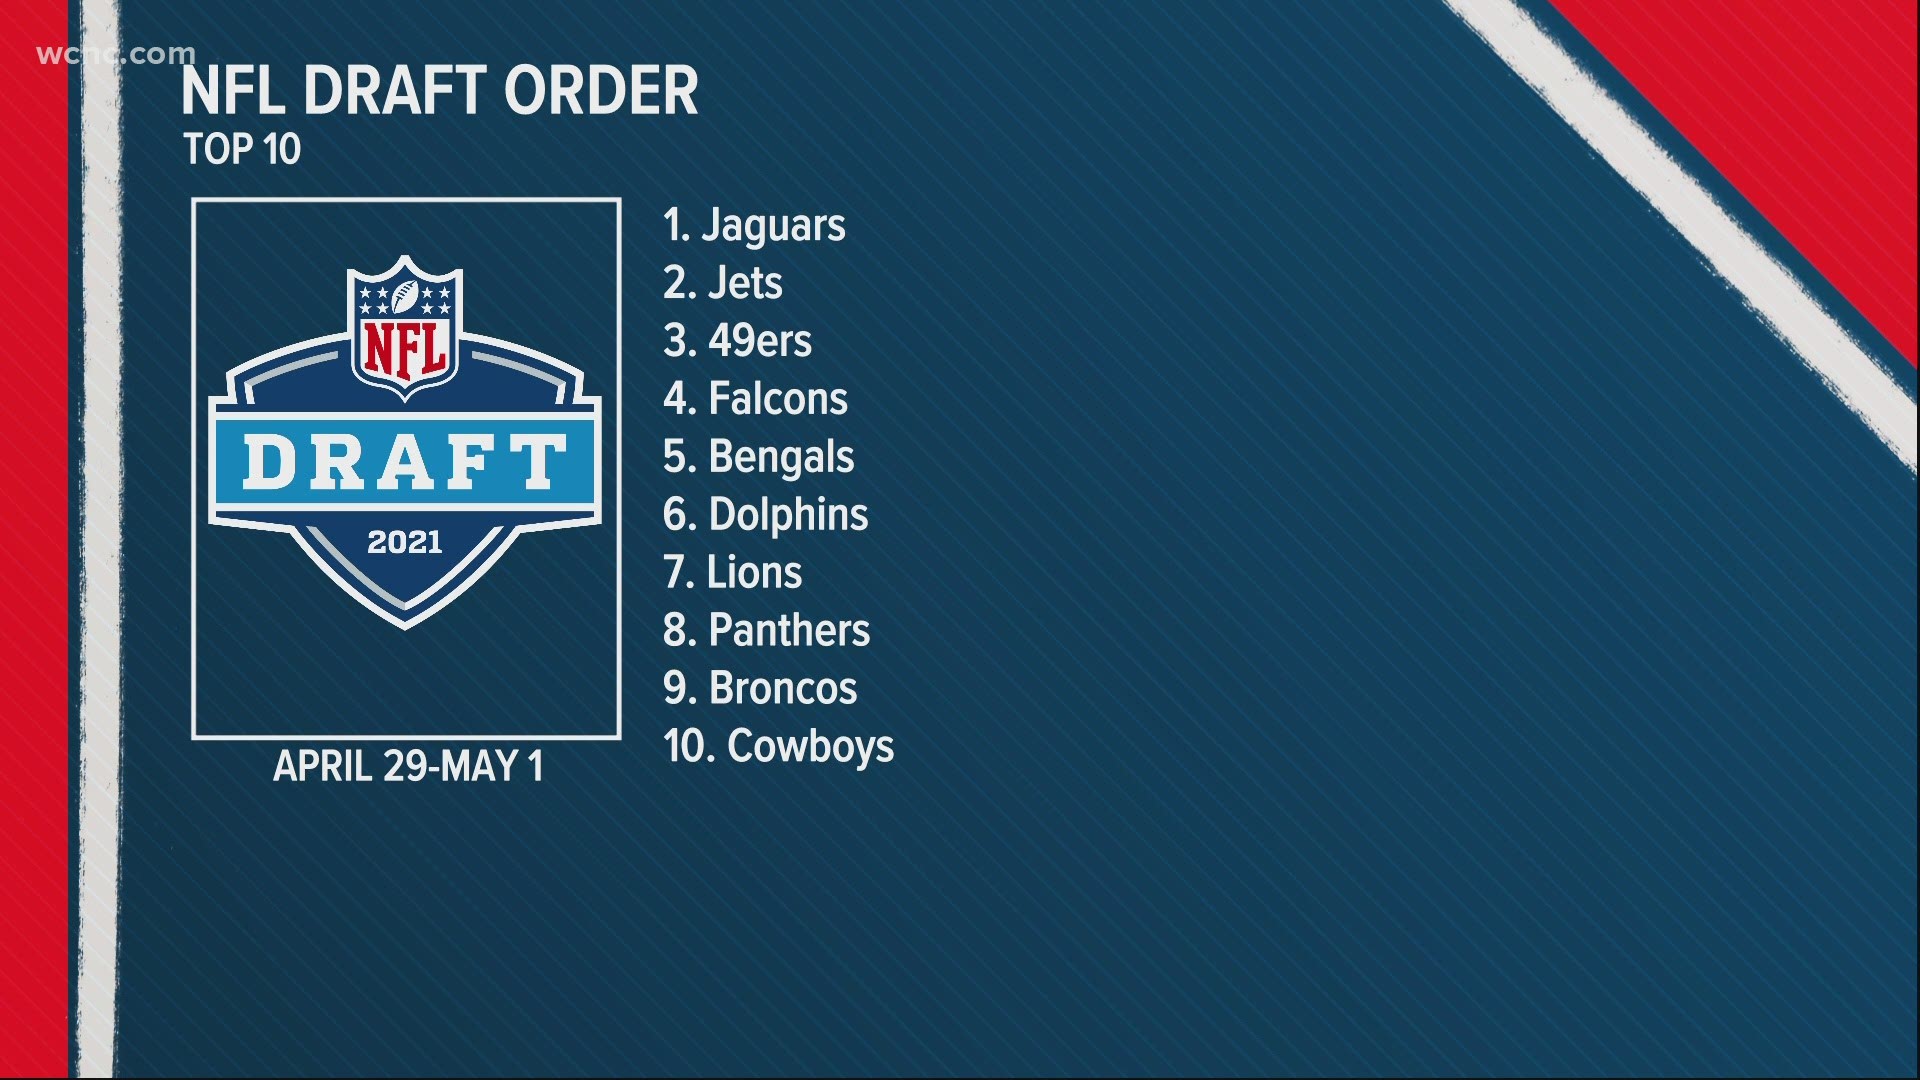 With the 49ers snagging the third pick and the Dolphins moving back in at six, there are five teams ahead of the Panthers that want a QB.